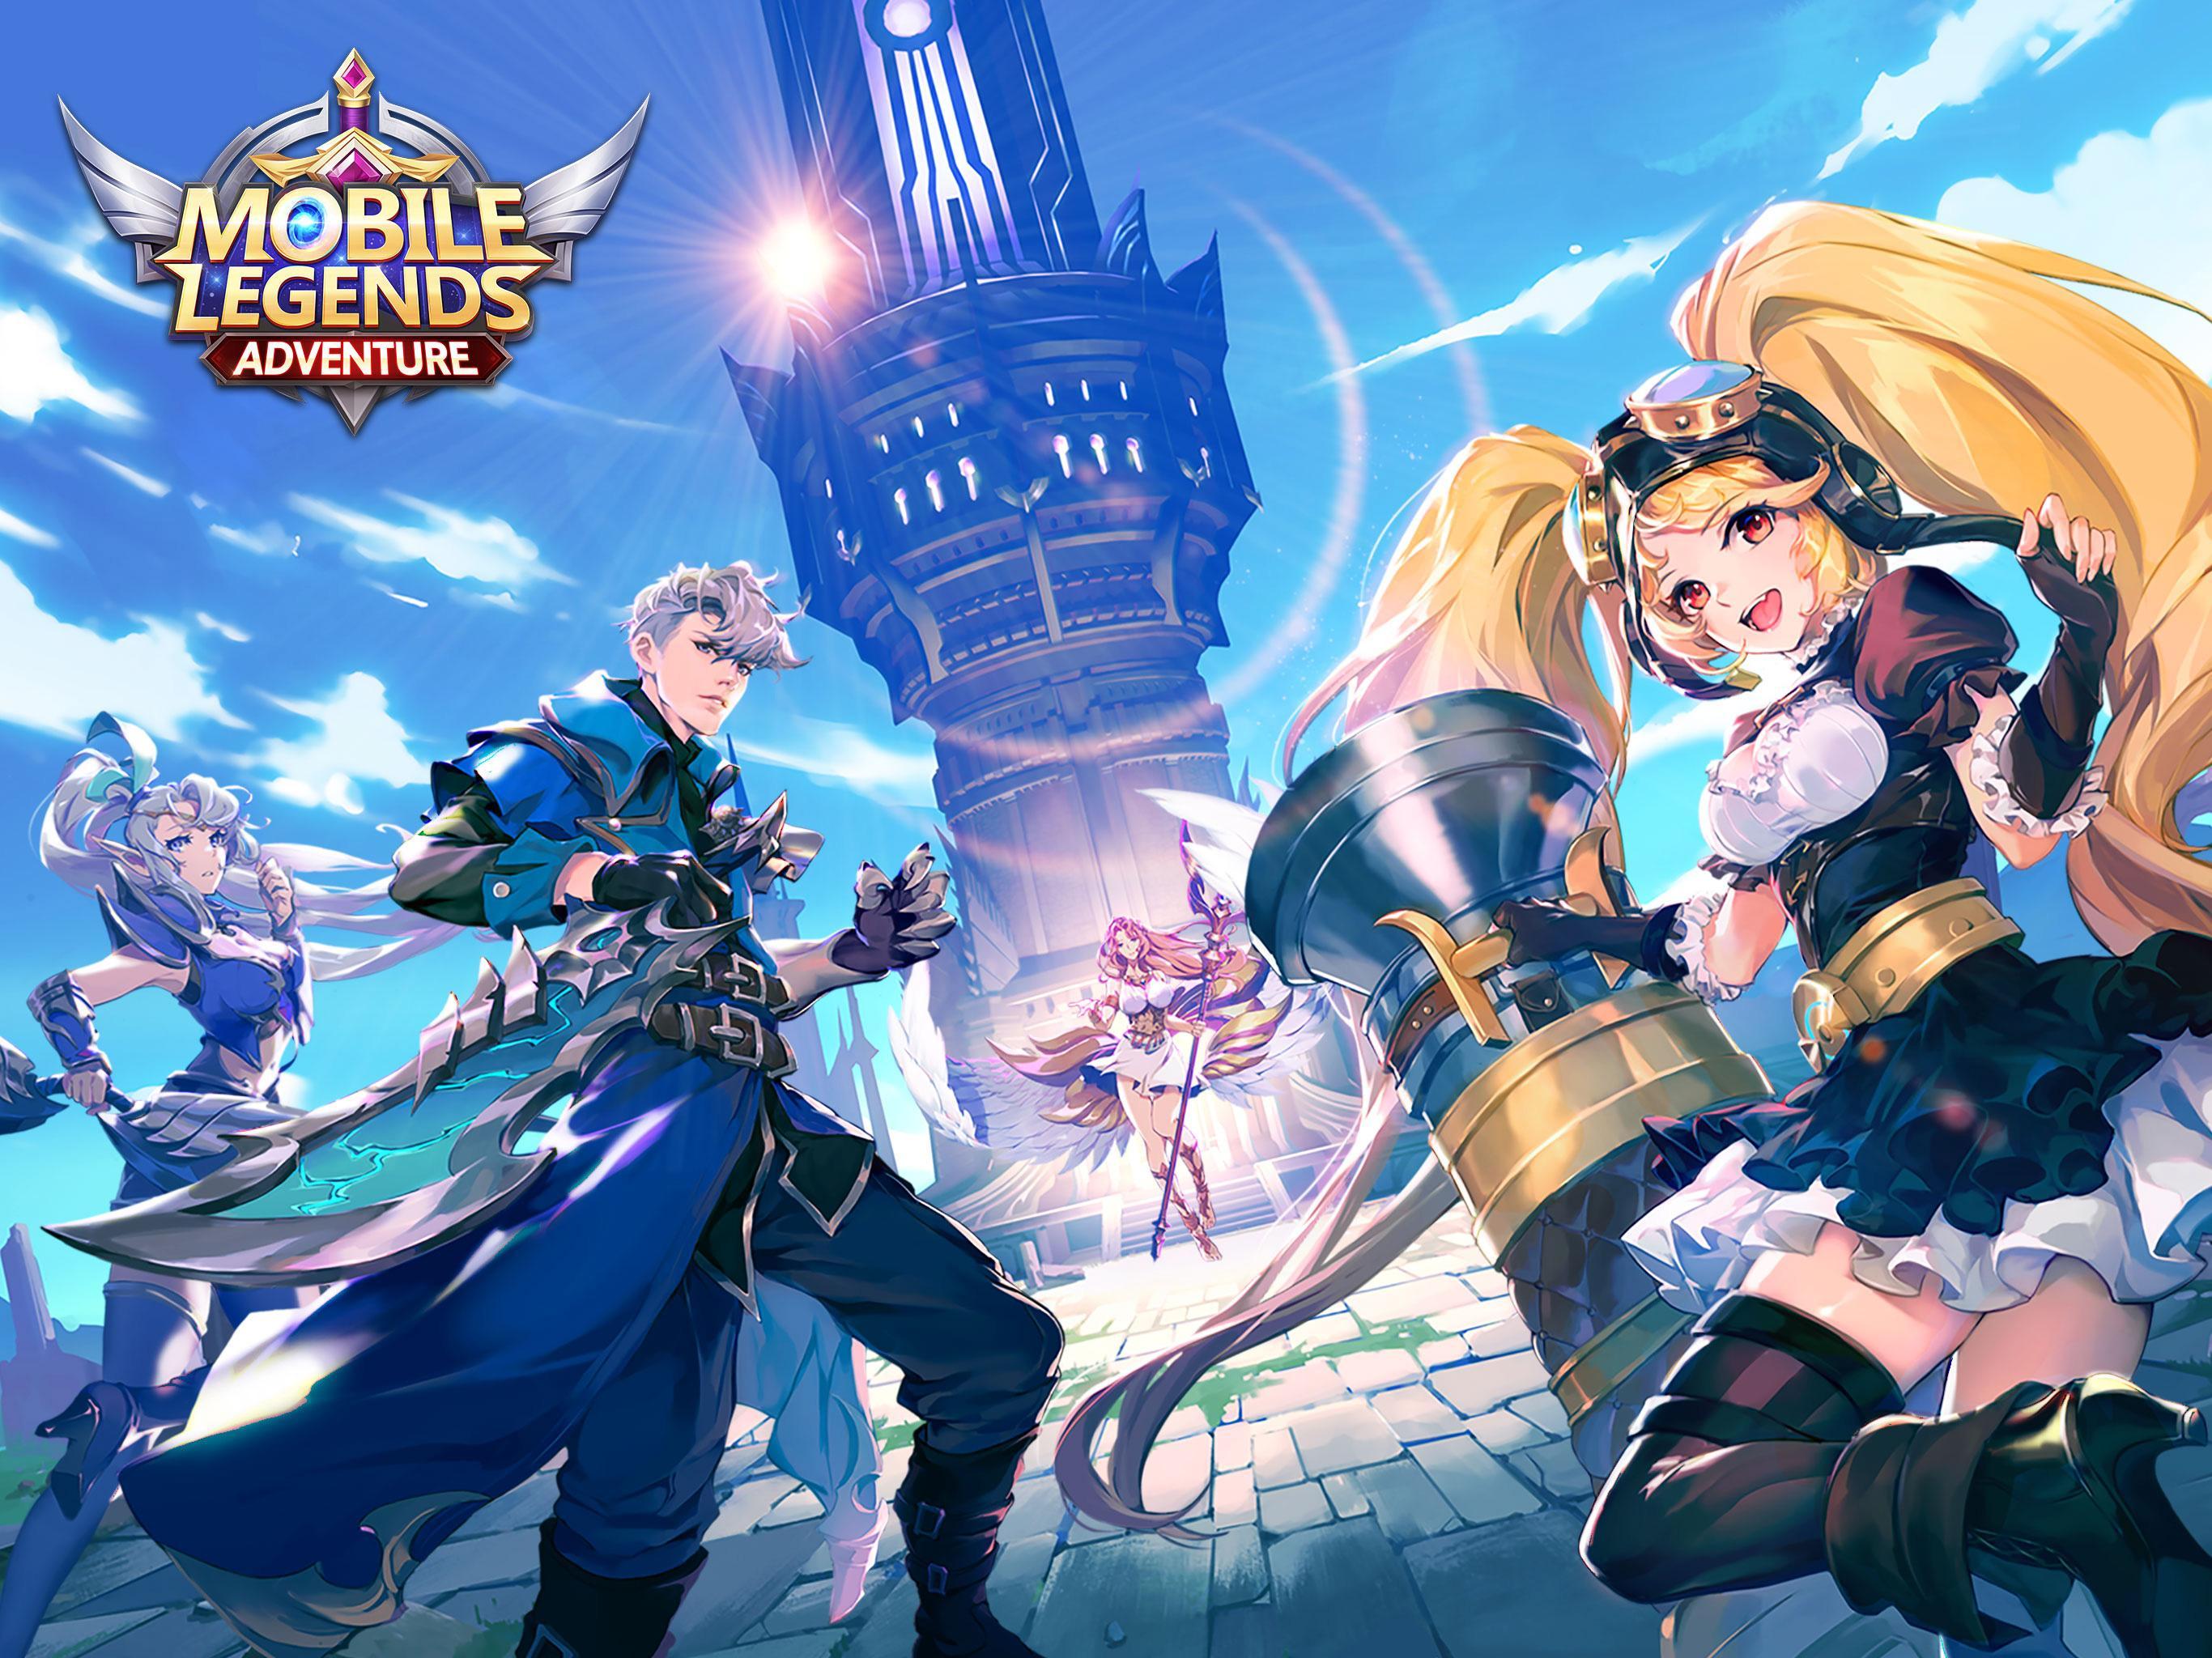  Mobile Legends  Adventure for Android APK Download